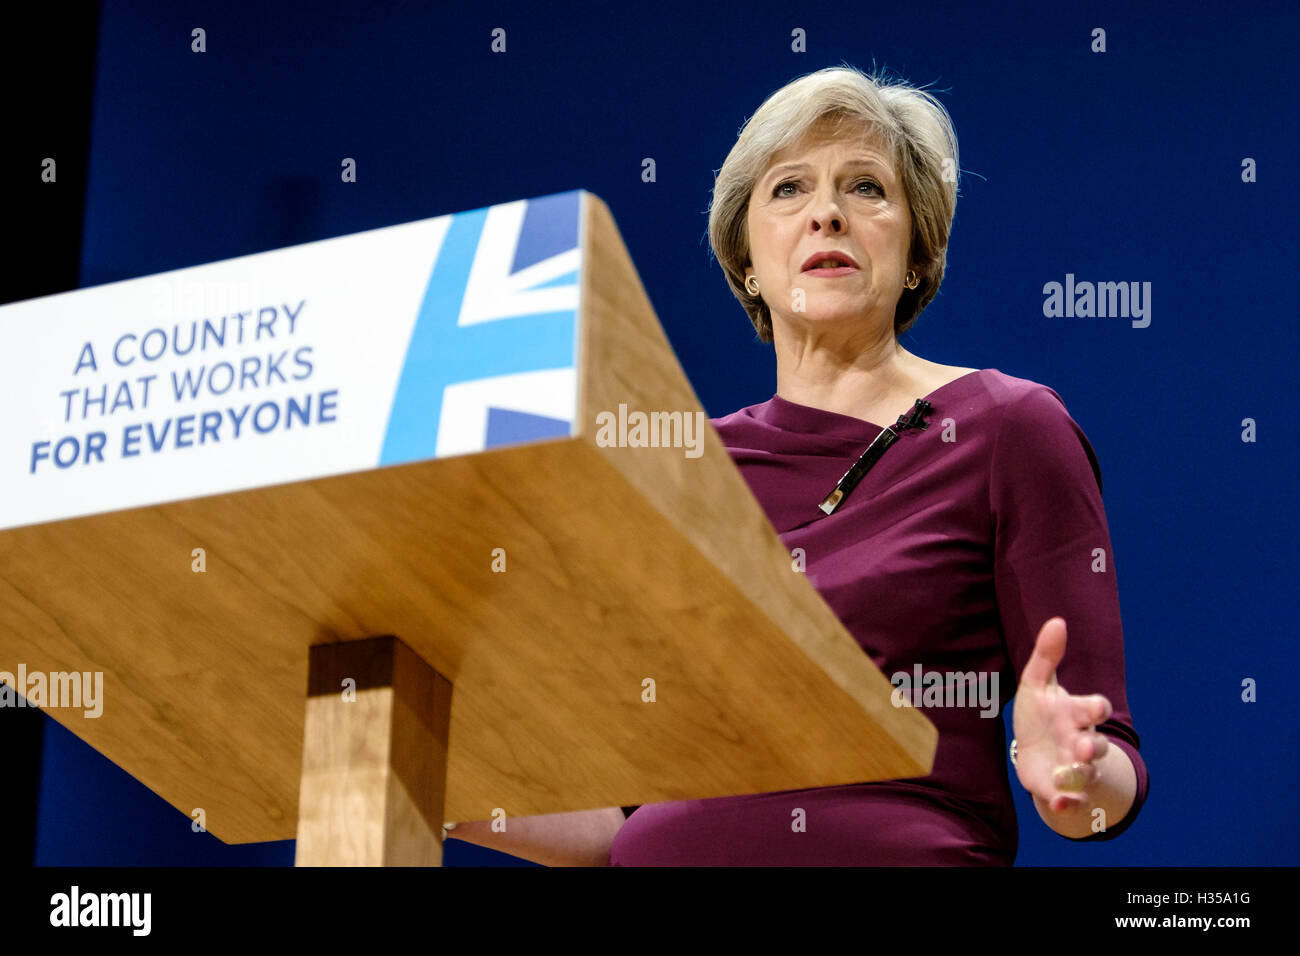 Conservative Party Conference day 4, final day on 05/10/2016 at Birmingham ICC, Birmingham. Persons pictured: Theresa May, Prime Minister of the United Kingdom, addresses conference . Picture by Julie Edwards. Stock Photo